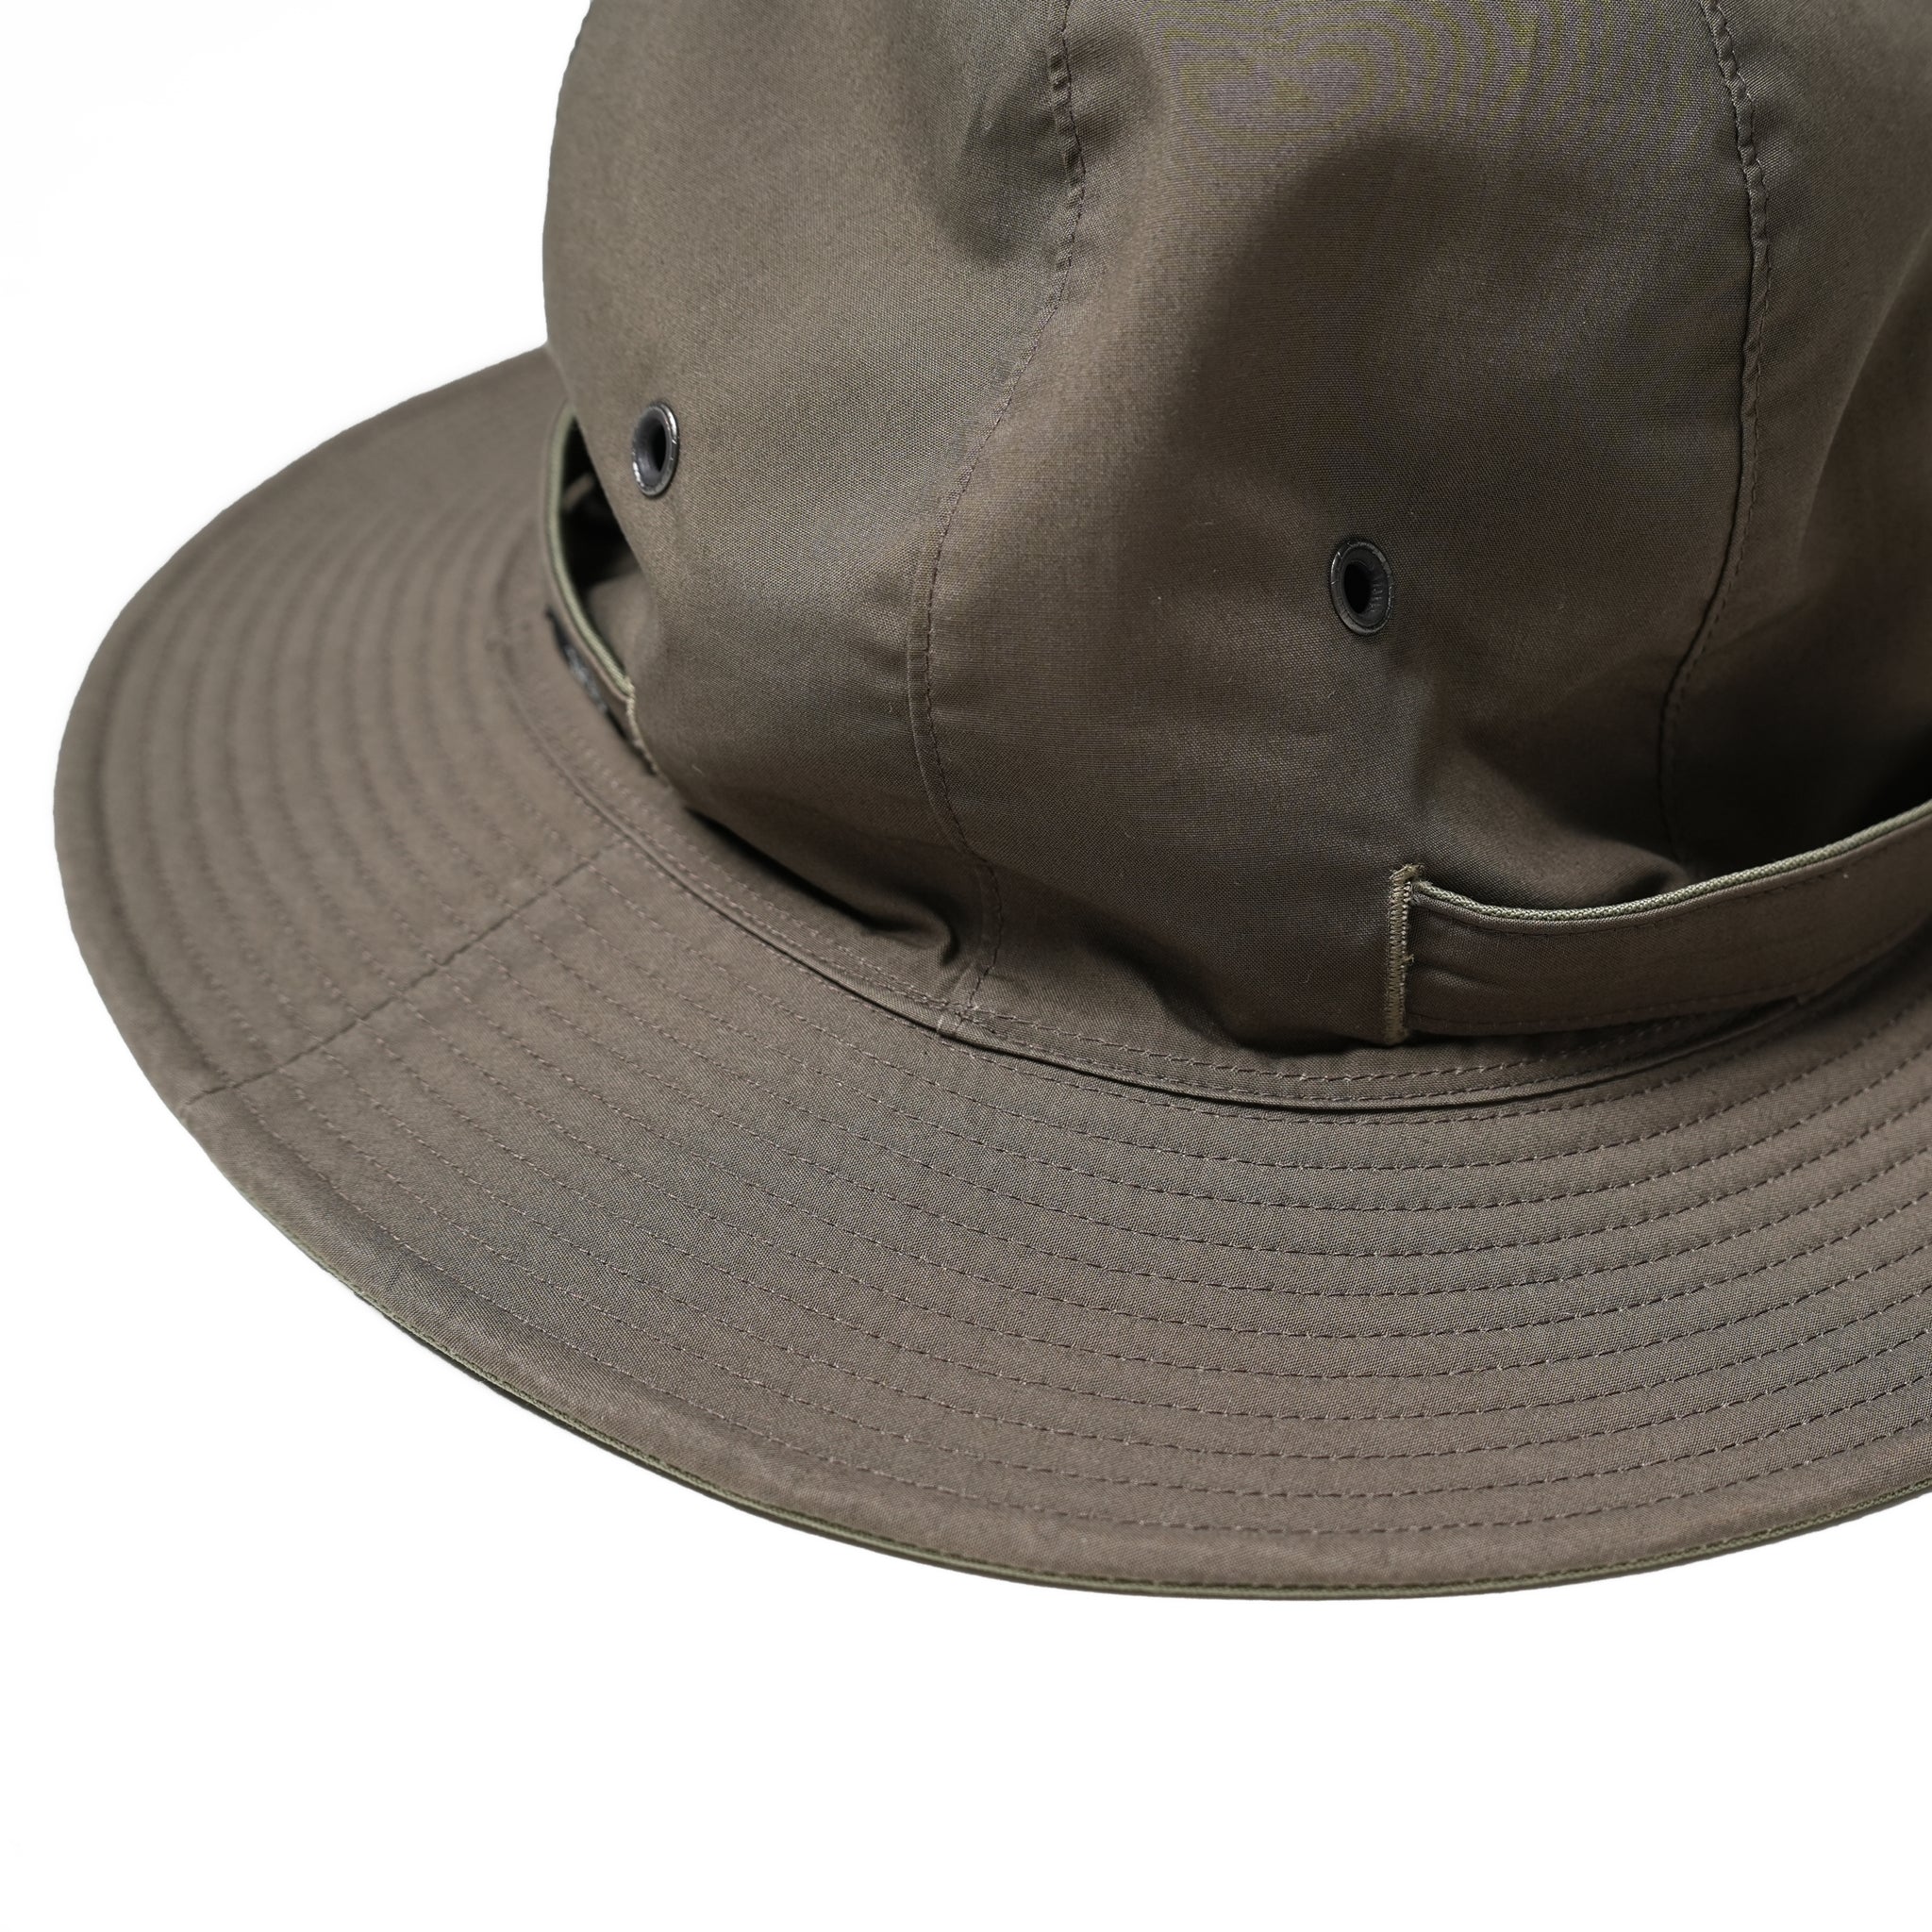 No:rl-21-1140 | Name:Reversible metro hat / リバーシブルメトロハット | Color:Olive【RACAL_ラカル】